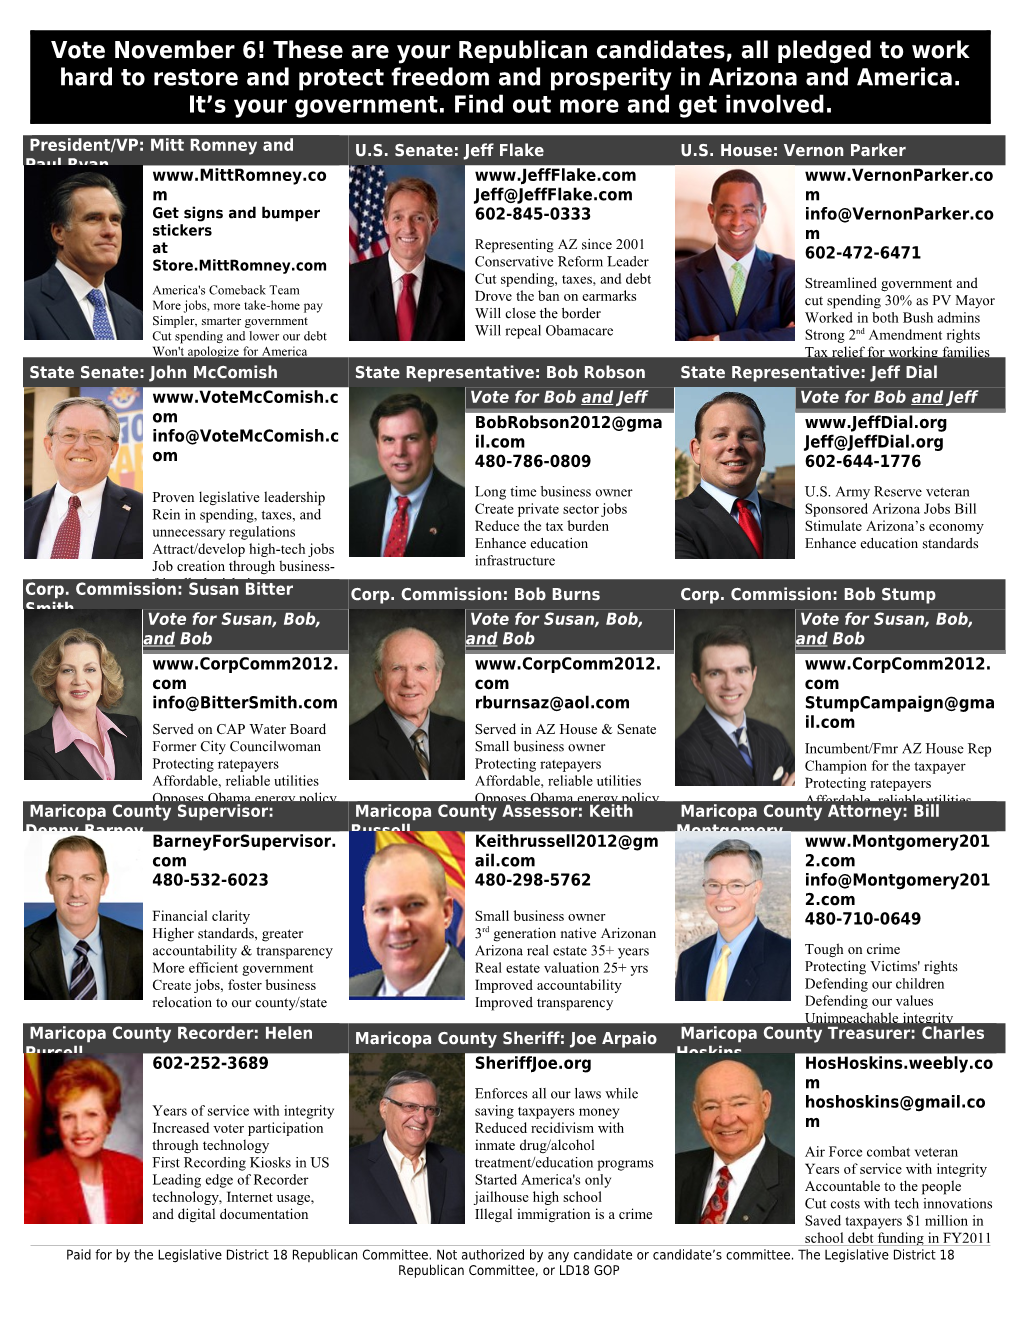 Vote November 6! These Are Your Republican Candidates, All Pledged to Work Hard to Restore